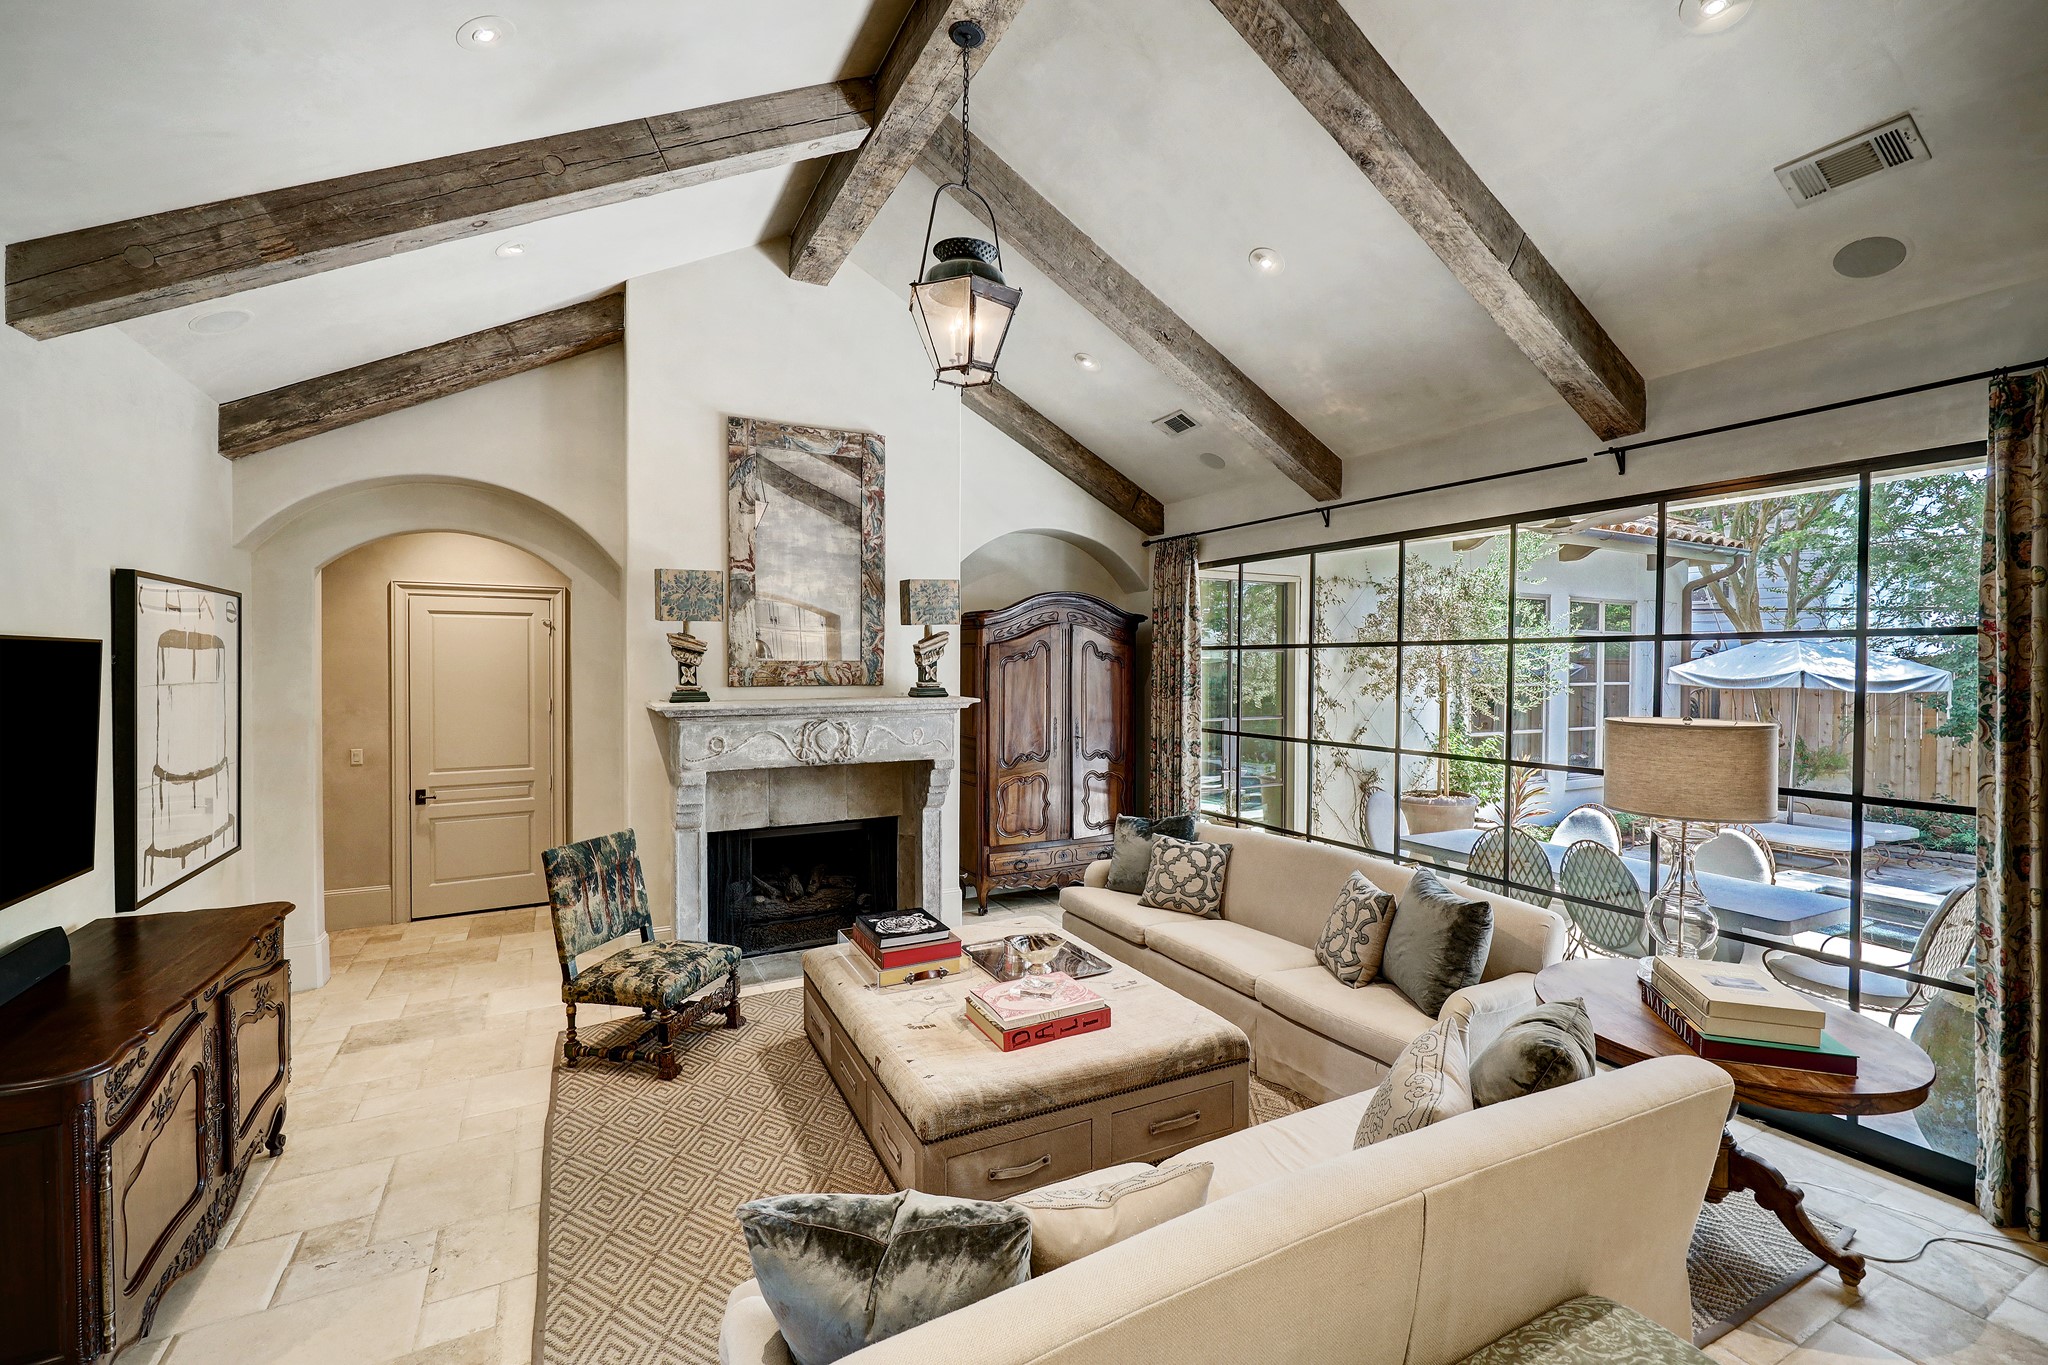 A masterful blend of history and modern luxury, the family room features delicately patinaed 18th-century French stable lanterns and a 16th-century Italian stone fireplace mantle that stands as a testament to Renaissance craftsmanship. Above, reclaimed wooden beams stretch across the ceiling, their rich texture and deep tones adding a touch of rustic charm to the otherwise sophisticated setting.